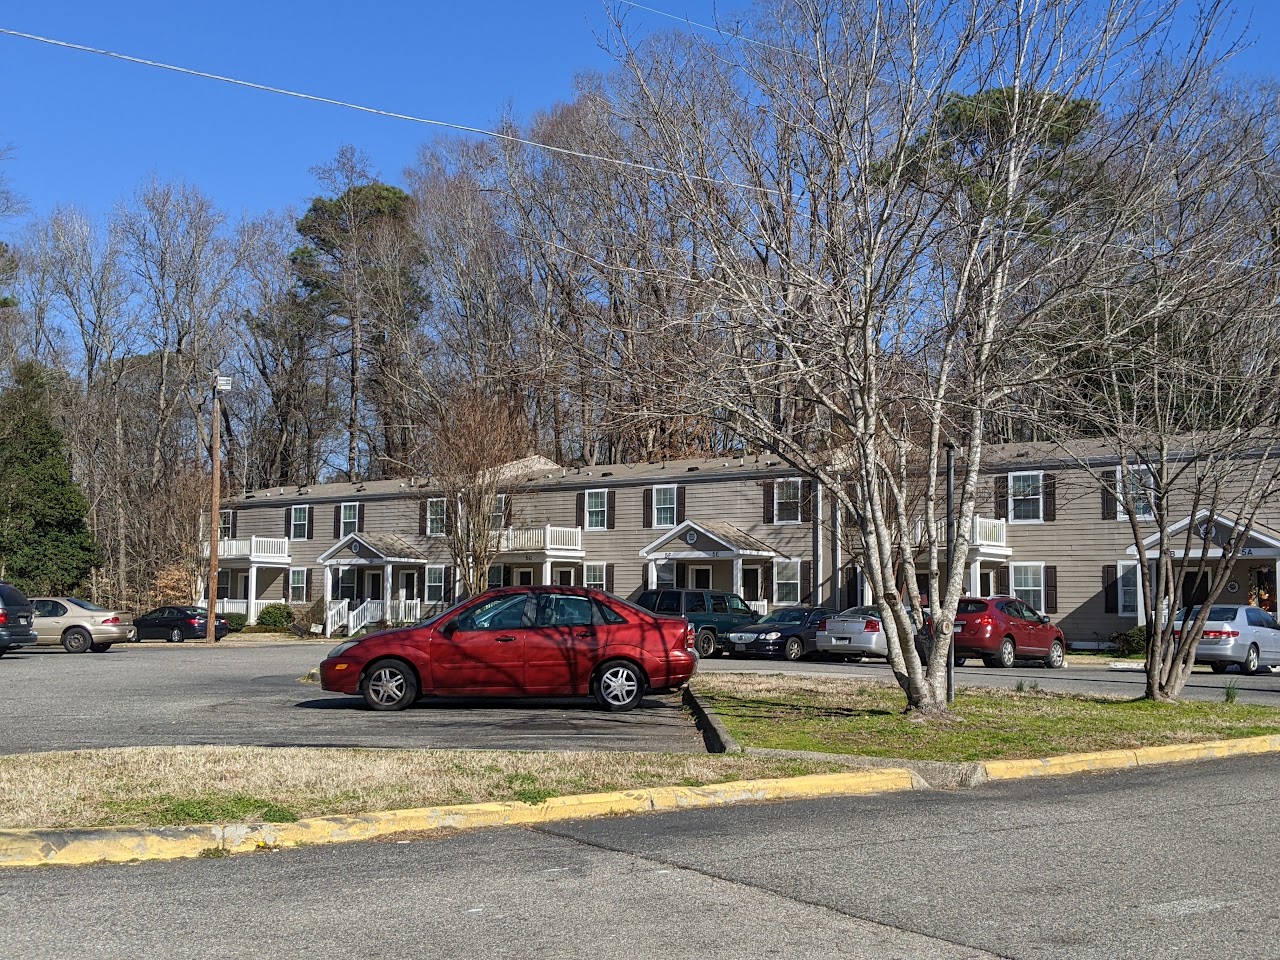 Photo of WOODS AT YORKTOWN. Affordable housing located at 2801 OLD WILLIAMSBURG RD YORKTOWN, VA 23690